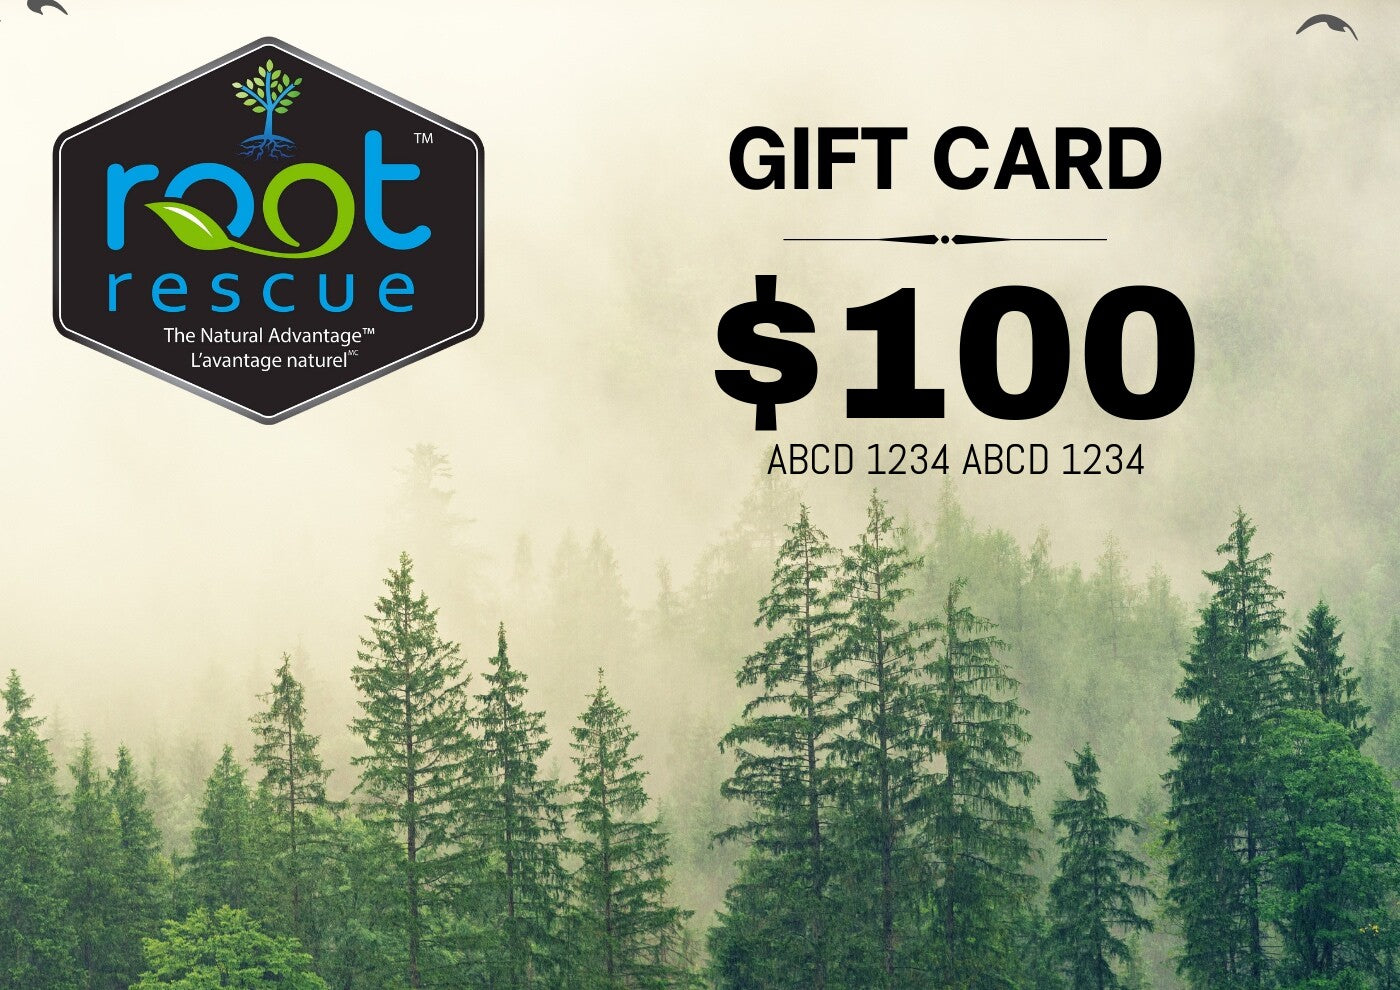 Root Rescue Products Gift Card - $100, $50, $20 or $10 Digital Cards.